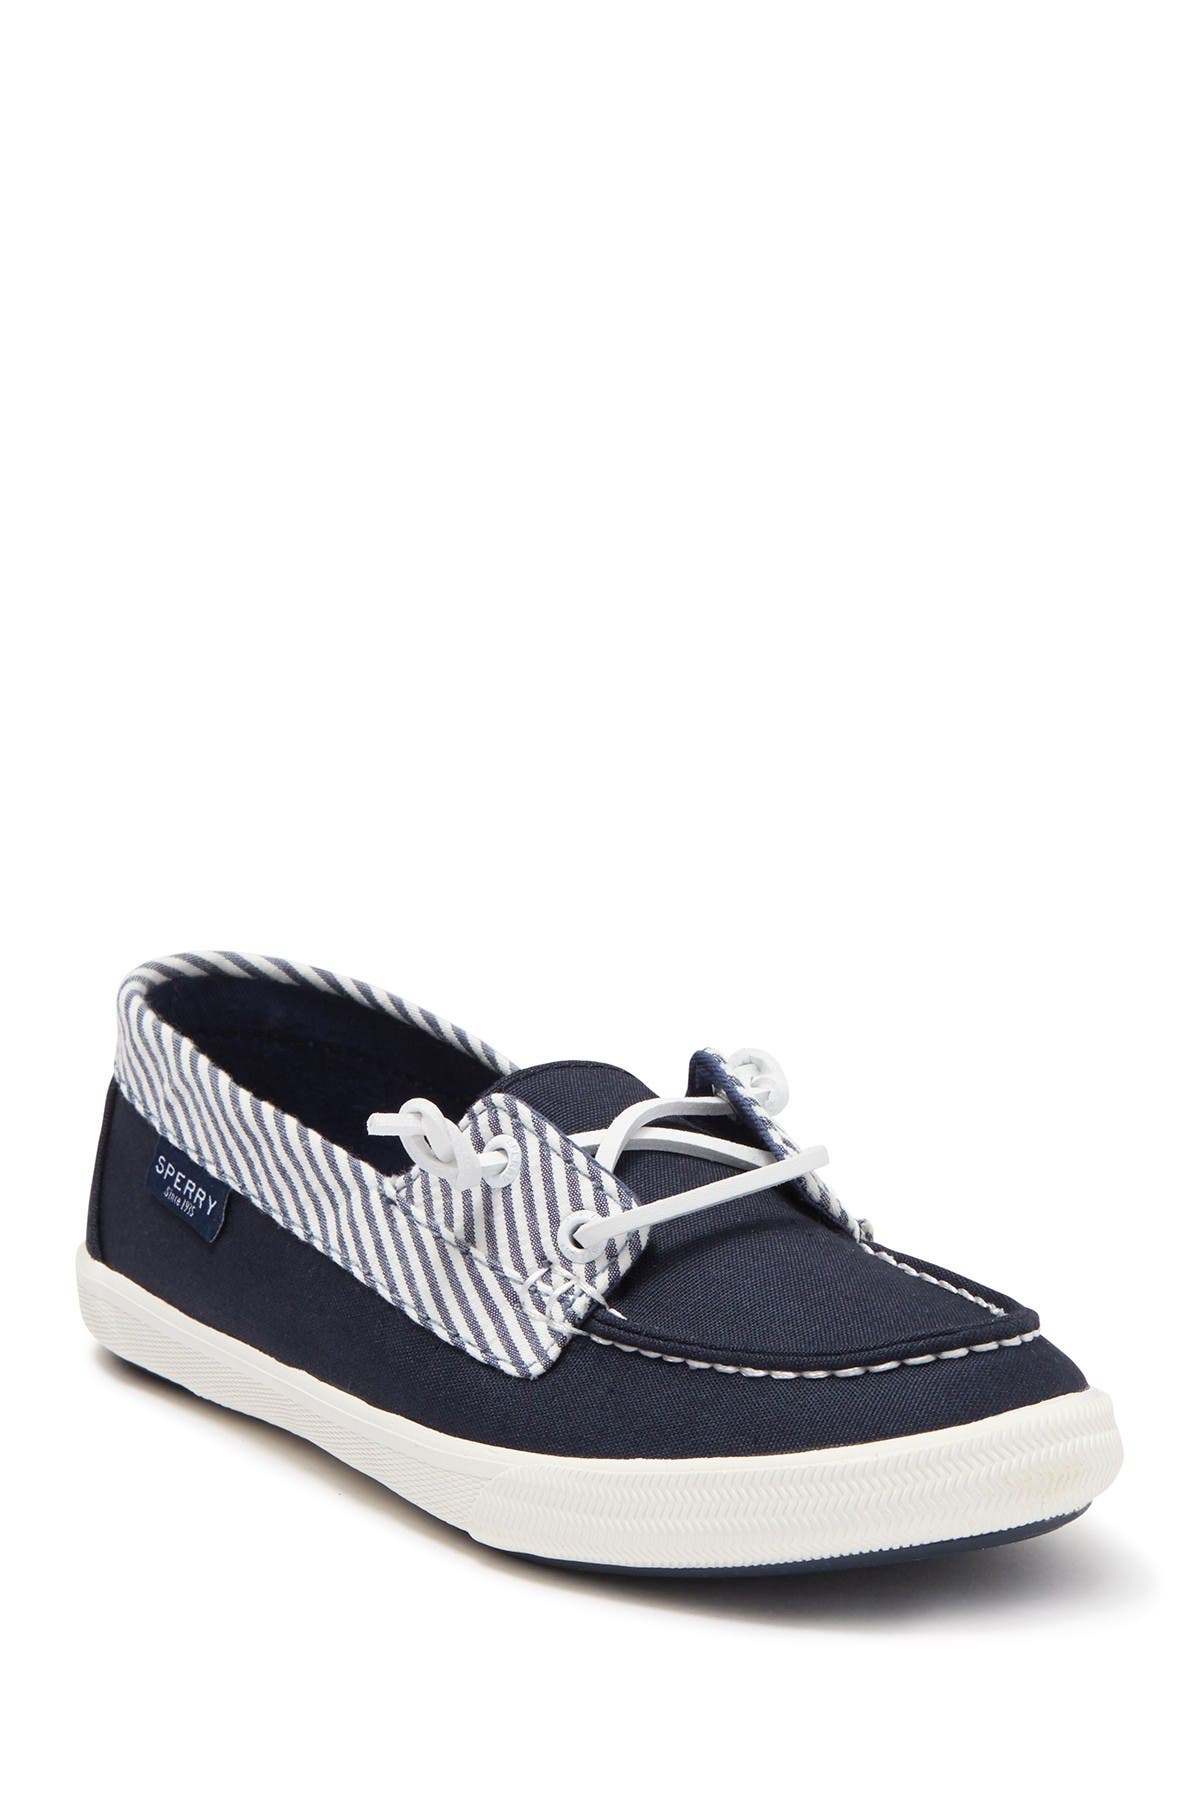 sperry lounge away white